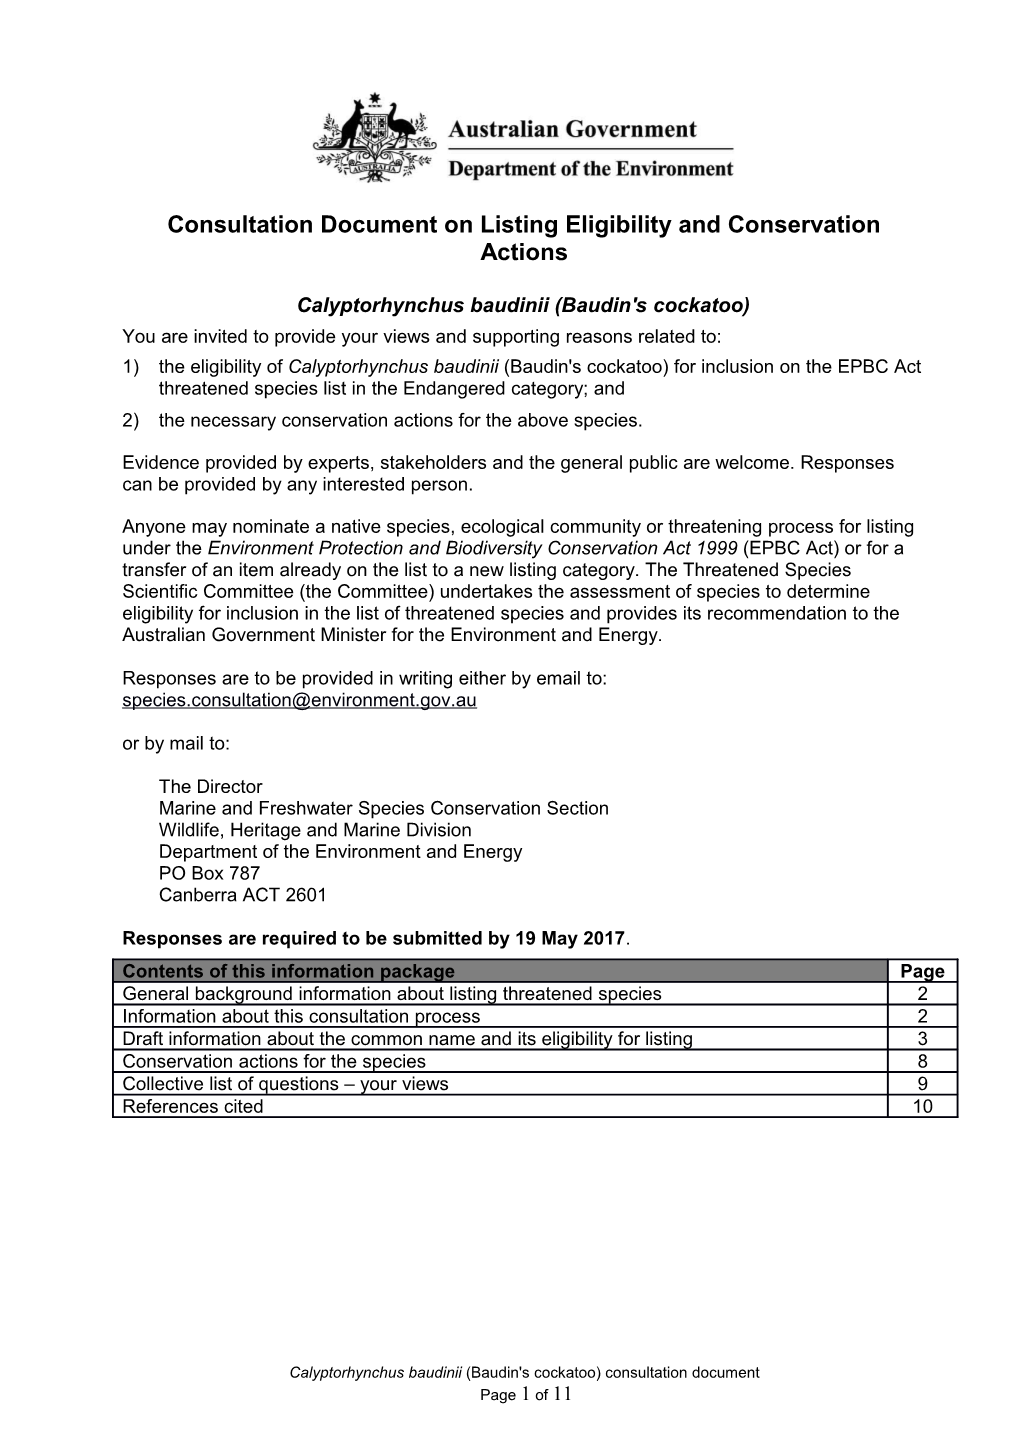 Consultation Document on Listing Eligibility and Conservation Actions Calyptorhynchus Baudinii